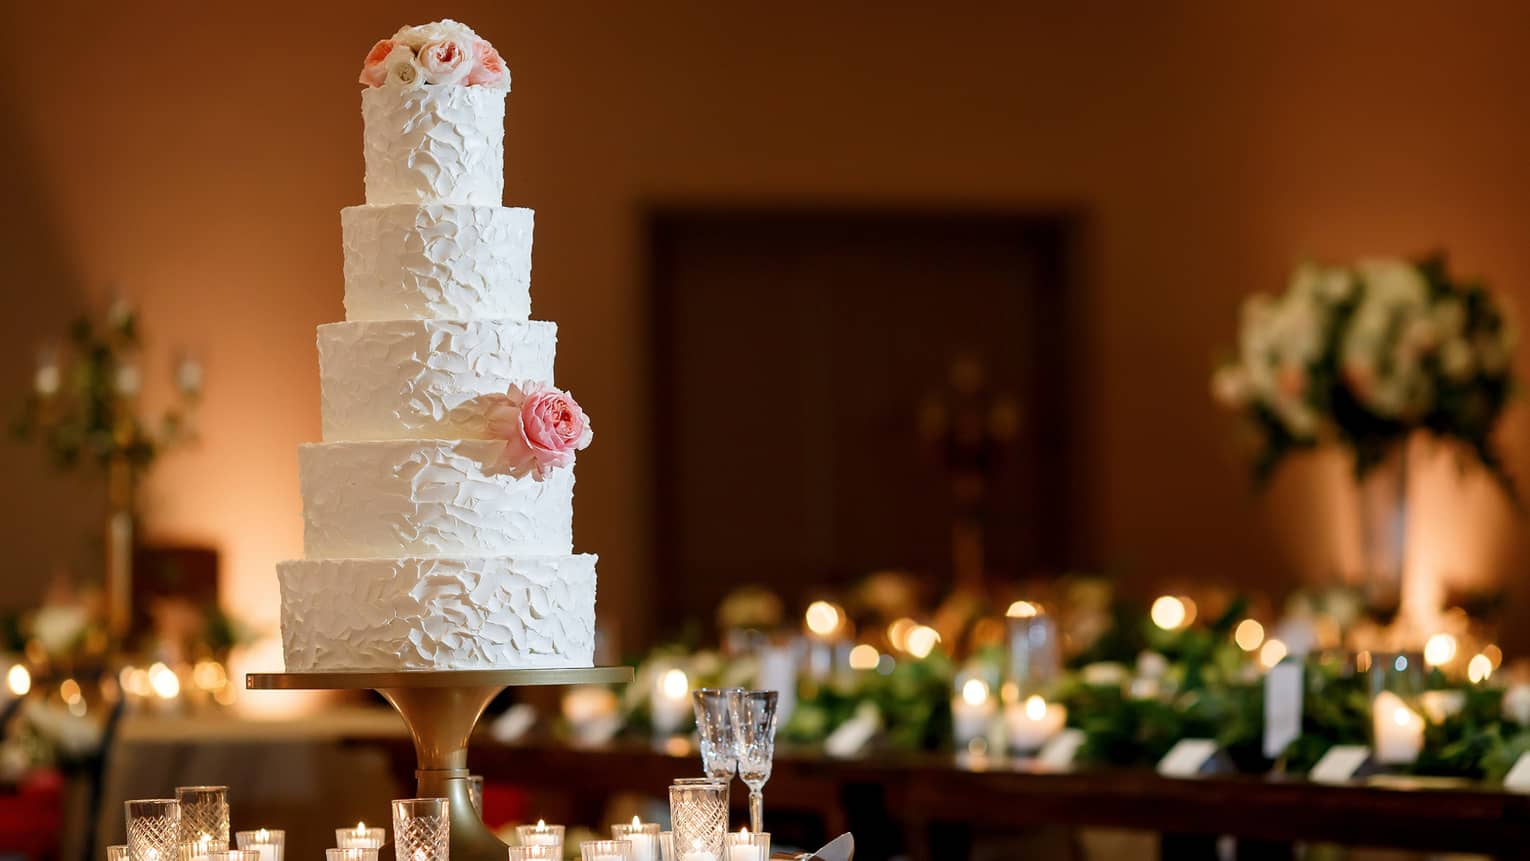 A five-tiered white wedding cake garnished with a white rose and some small white and pink flowers on the top tier , sits on a white round table surrounded by white candles